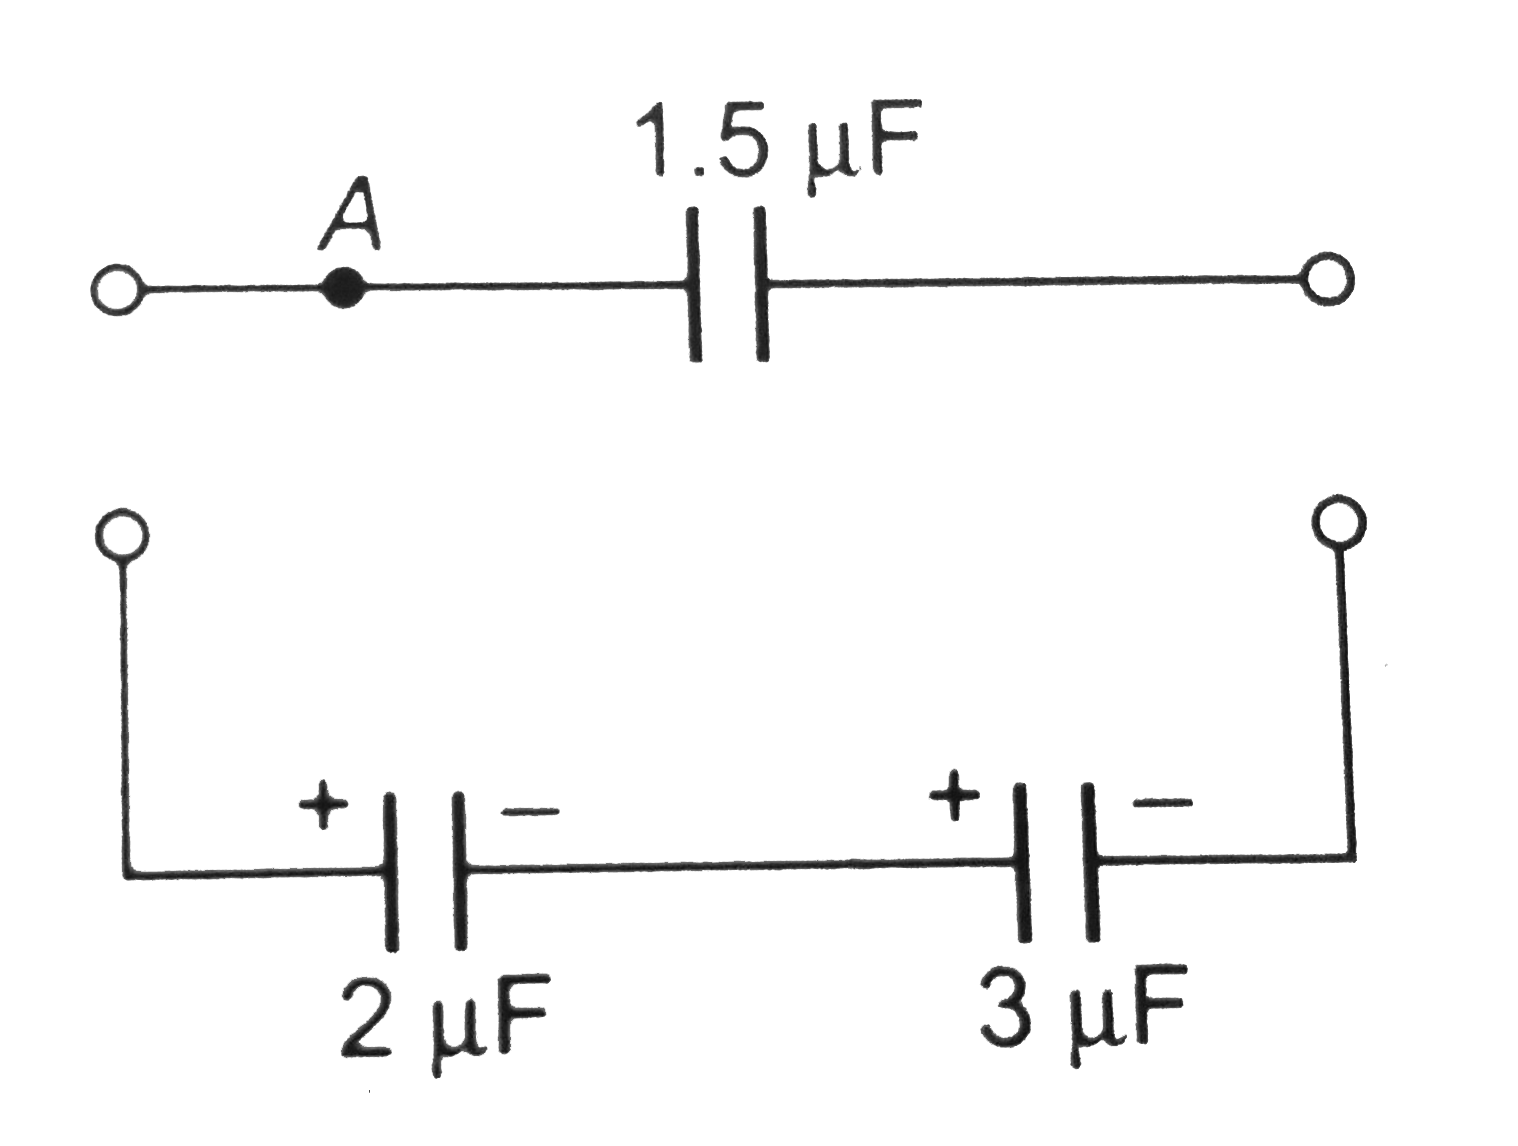 Two capacitors of 2muF and 3muF are charged to 150 V and 120 V, respectively. The plates of capacitor are connected as shown in the figure. An uncharged capacitor of capacity 1.5muF falls to the free end of the wire. Then